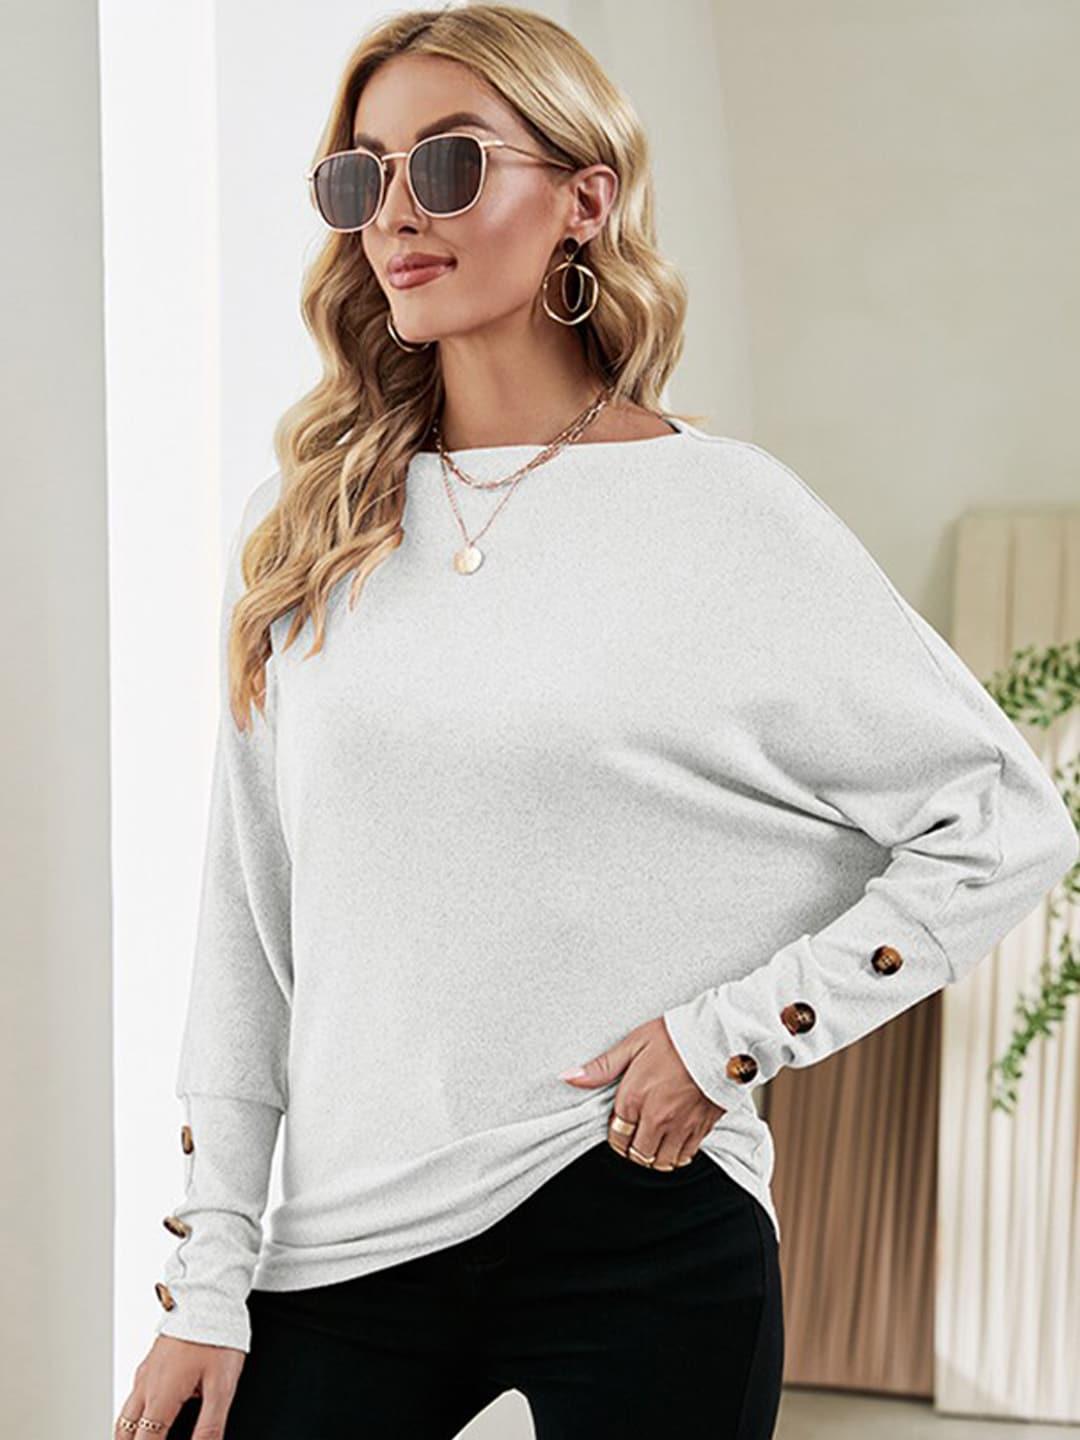 stylecast women off white pullover